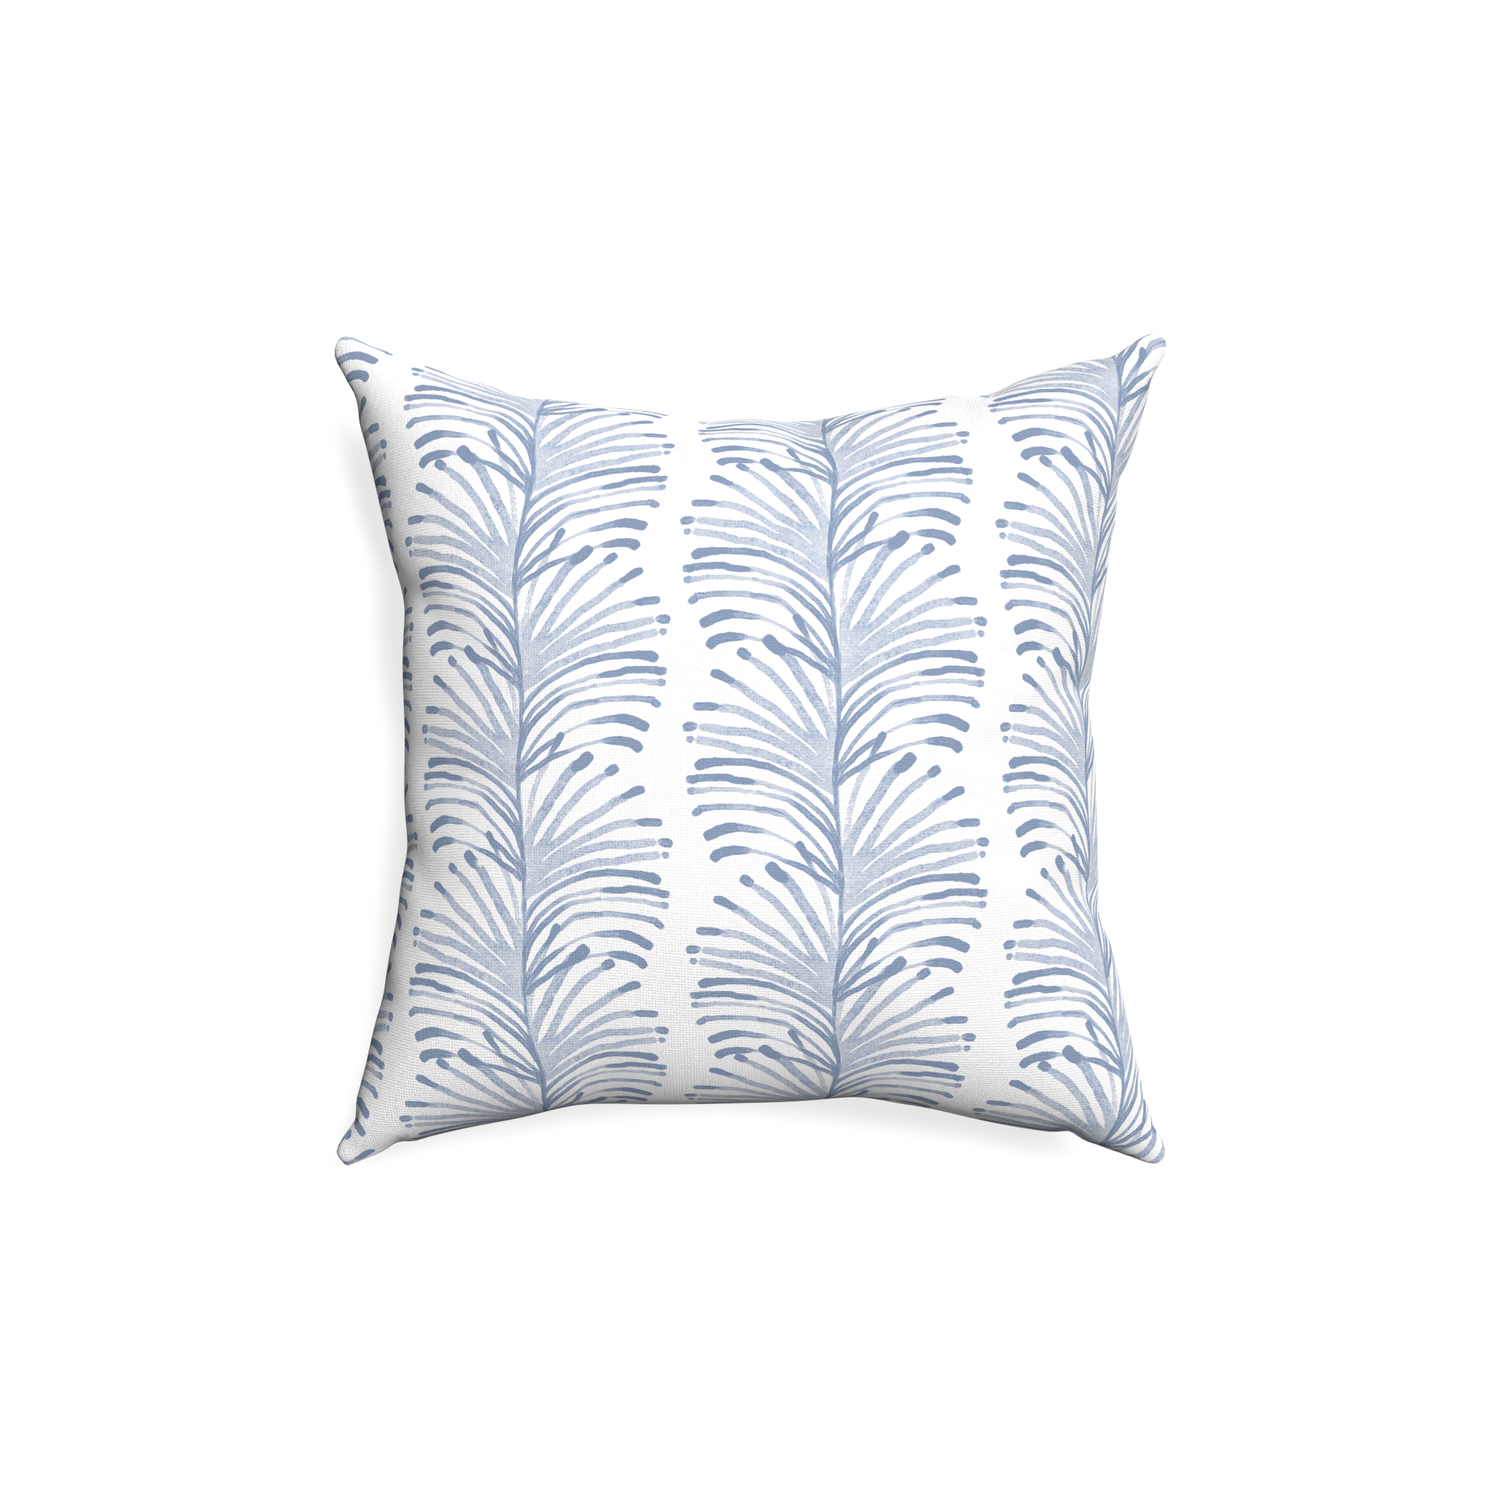 18-square emma sky custom sky blue botanical stripepillow with none on white background